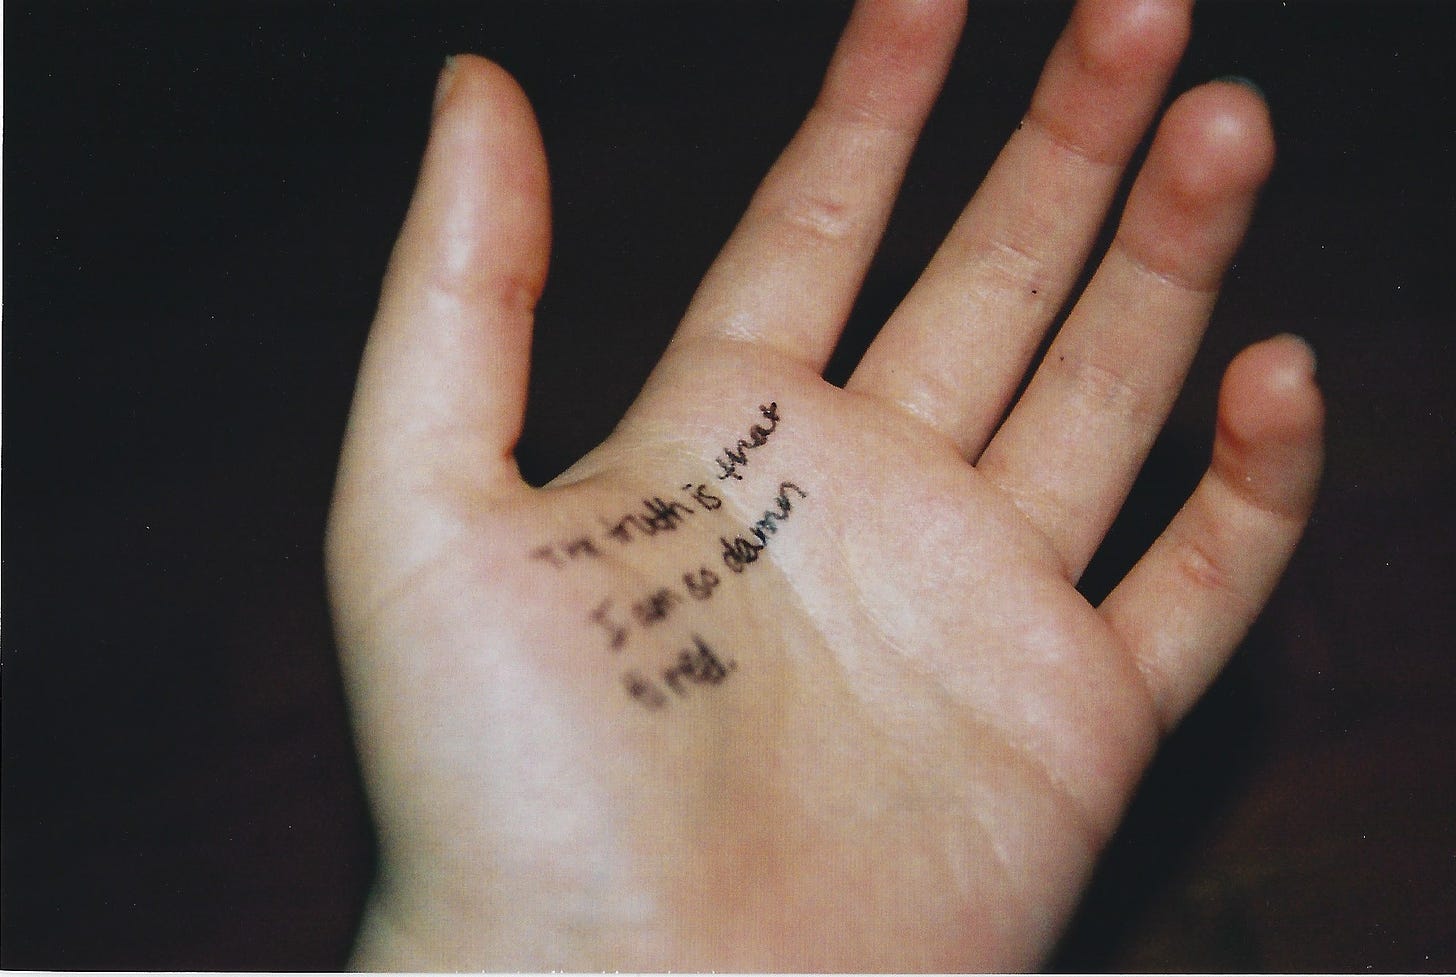 Hand on which is written: "The truth is that I am so damn tired."